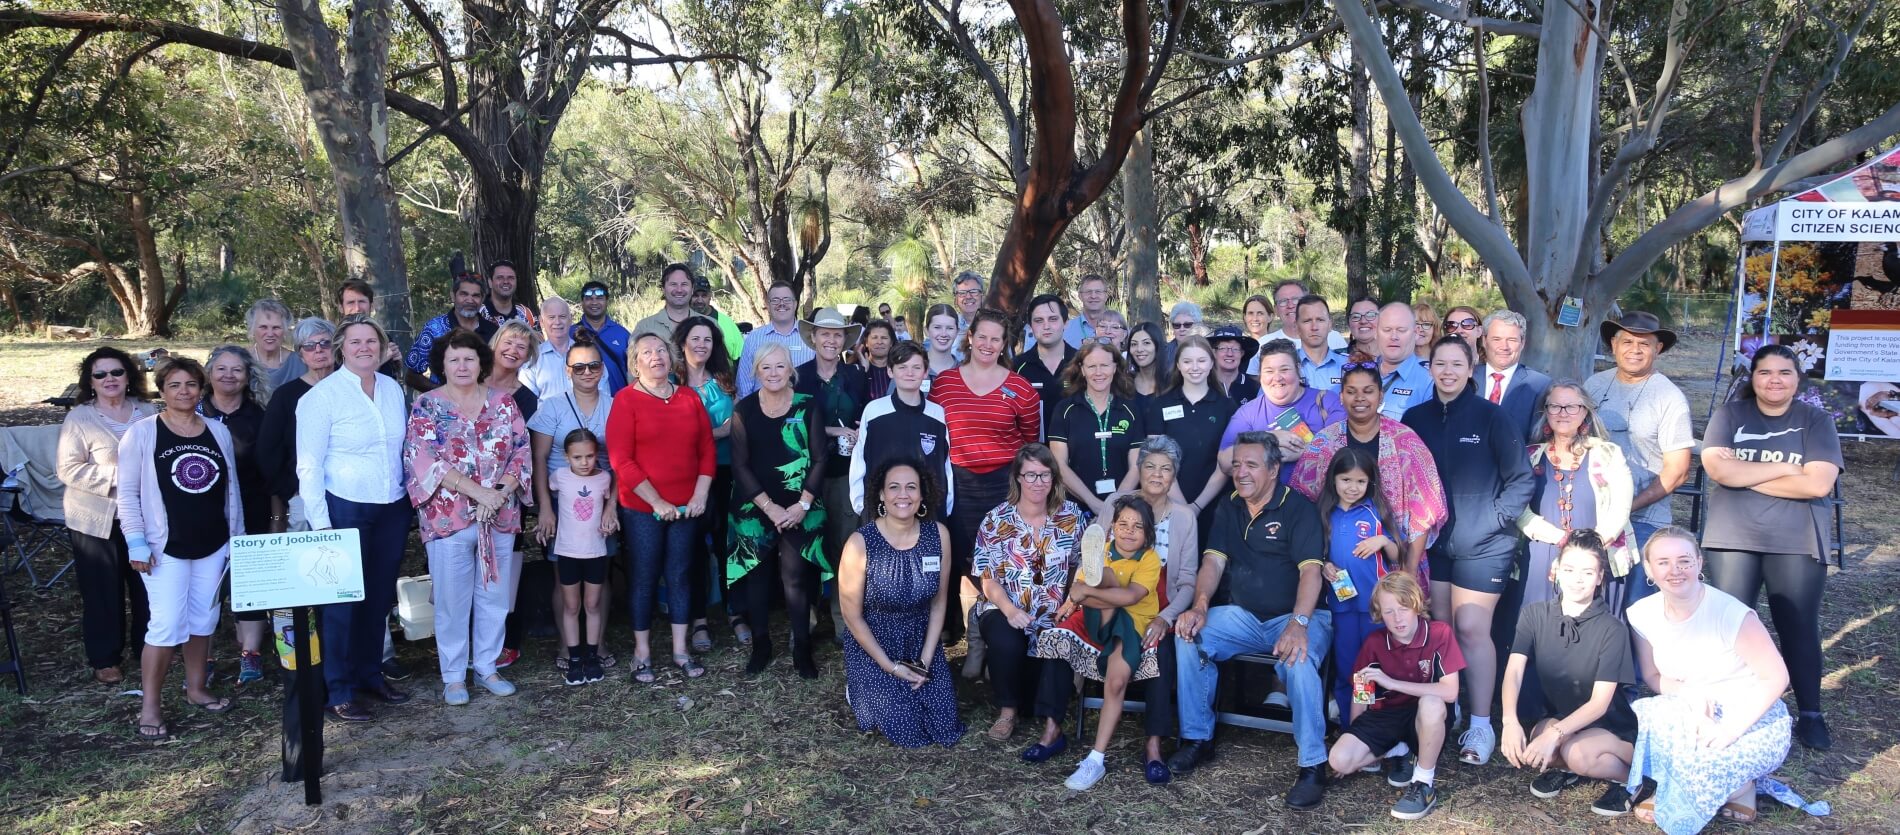 Community and City staff at the Kalamunda Innovate Reconciliation Action Plan launch held at Hartfield Park in Forrestfield on 21 November 2019.